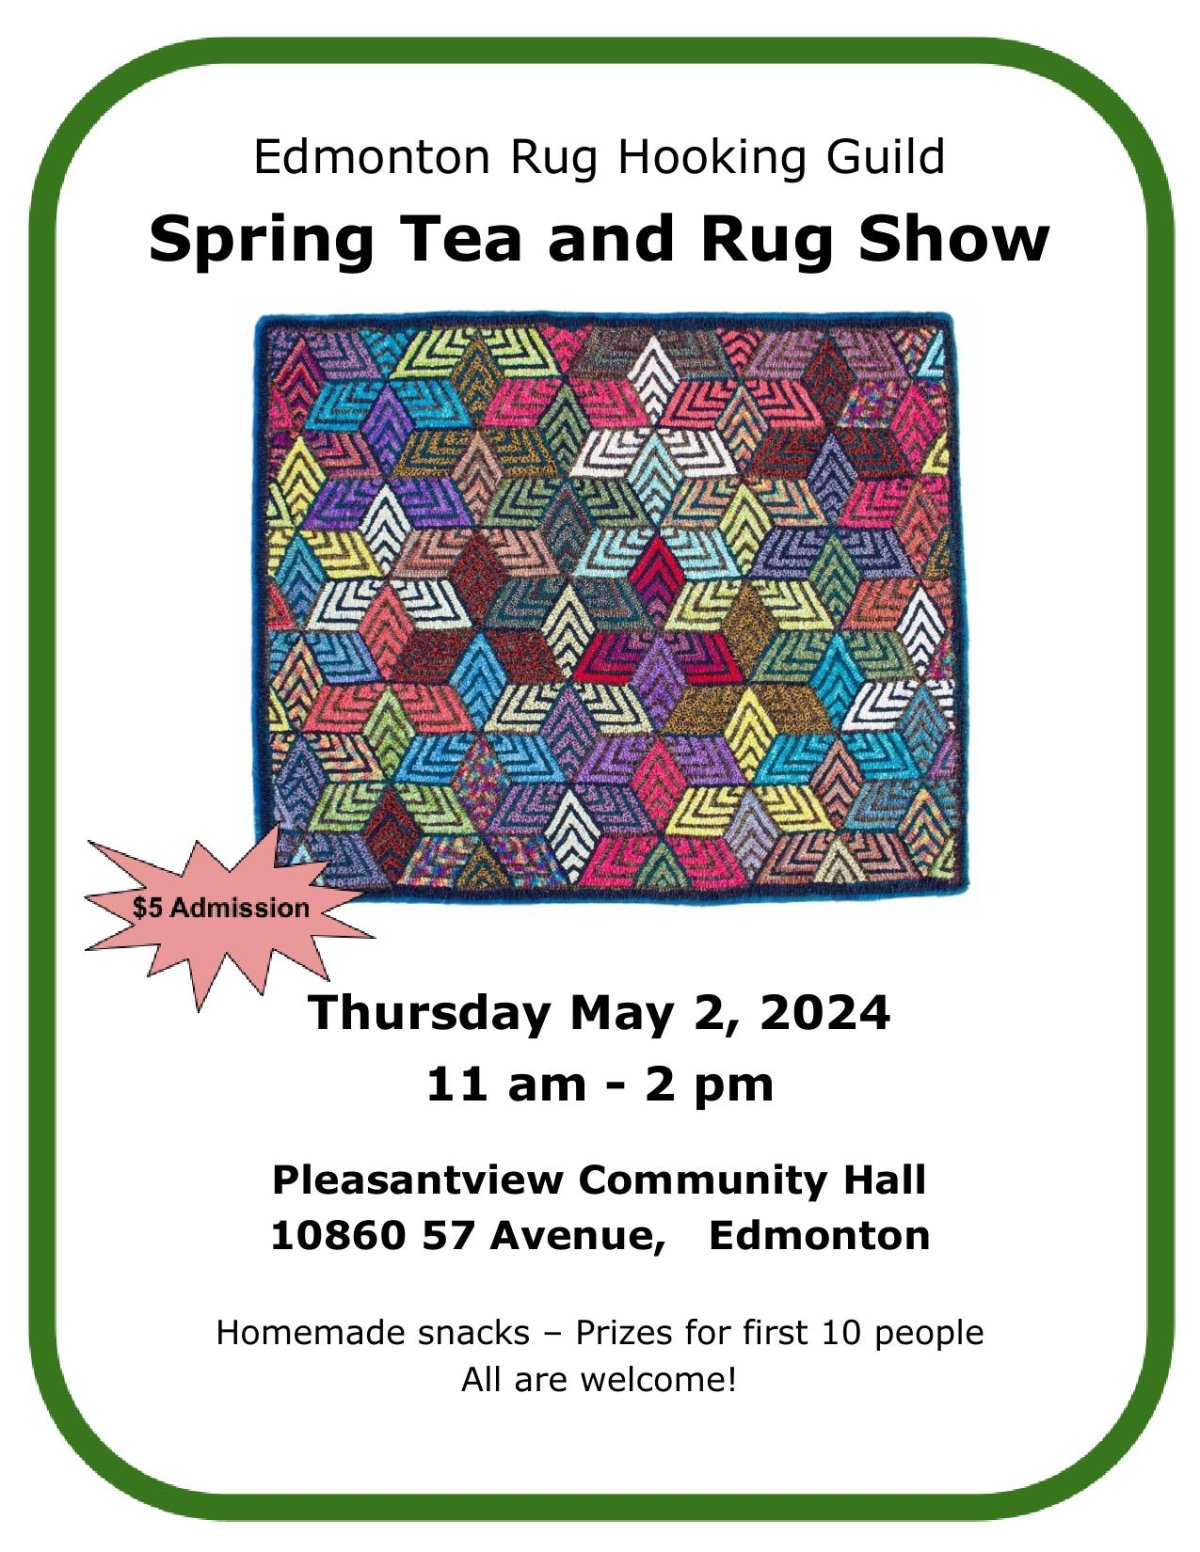 Edmonton Rug Hooking Guild Annual Spring Tea and Rug Show - image